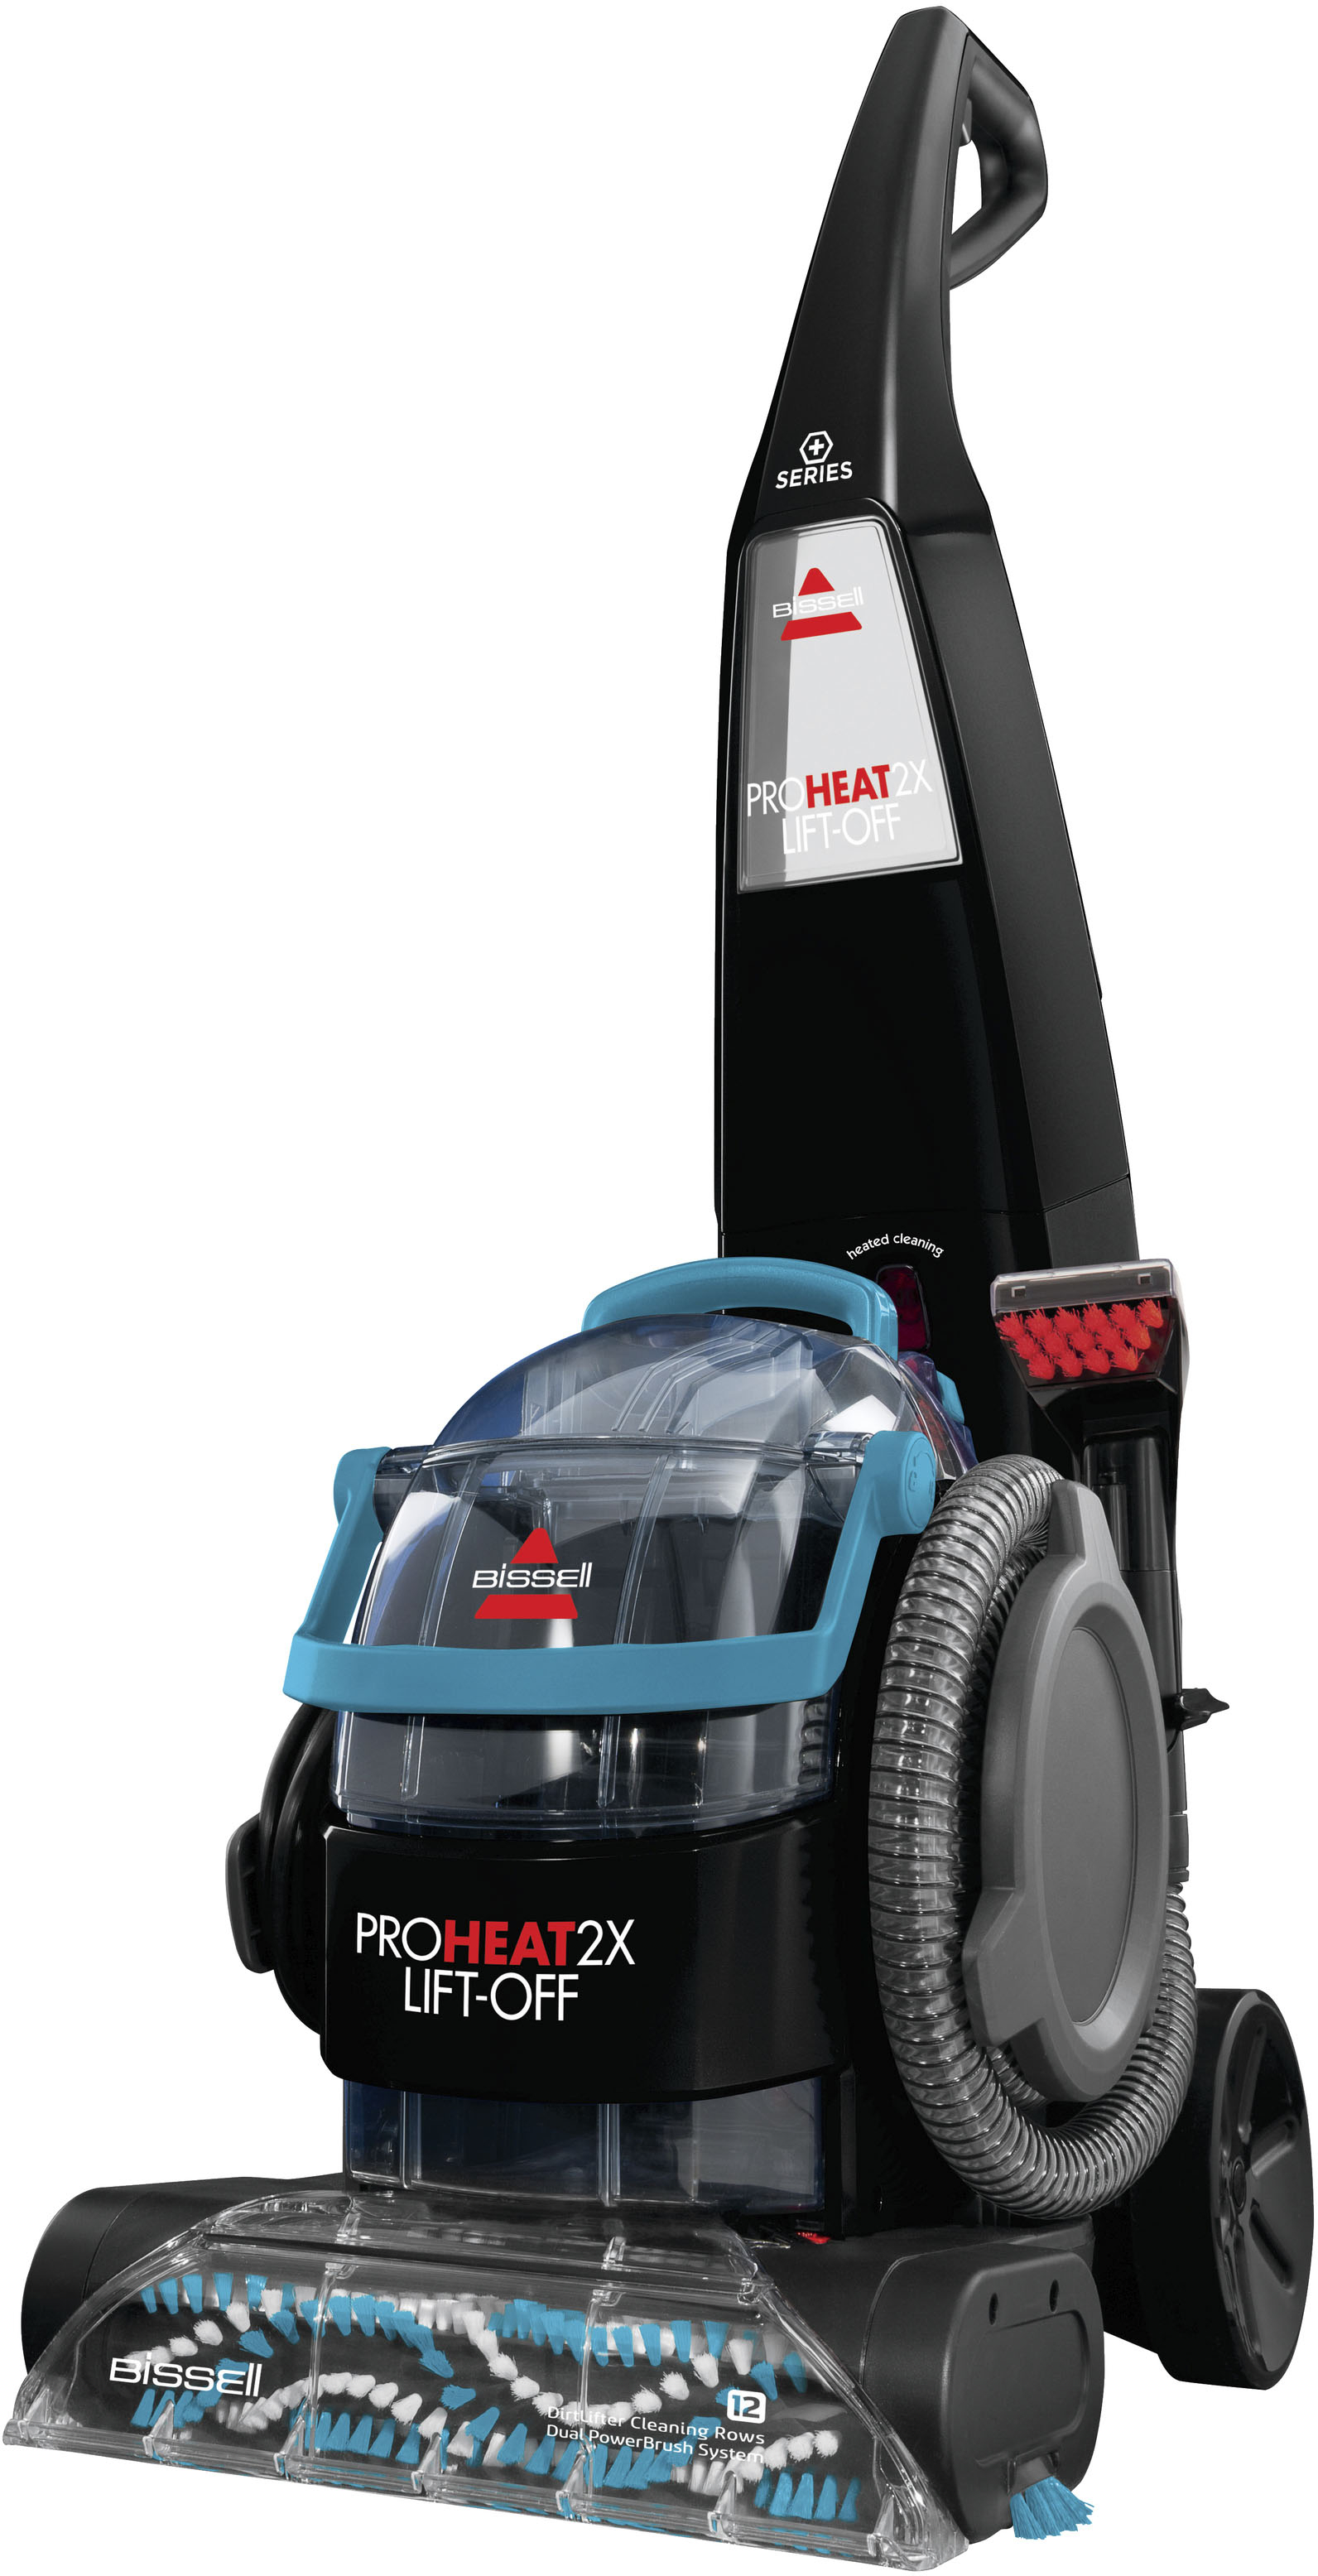 Angle View: BISSELL - ProHeat 2X Lift-Off  Upright Deep Cleaner - Titanium and Teal